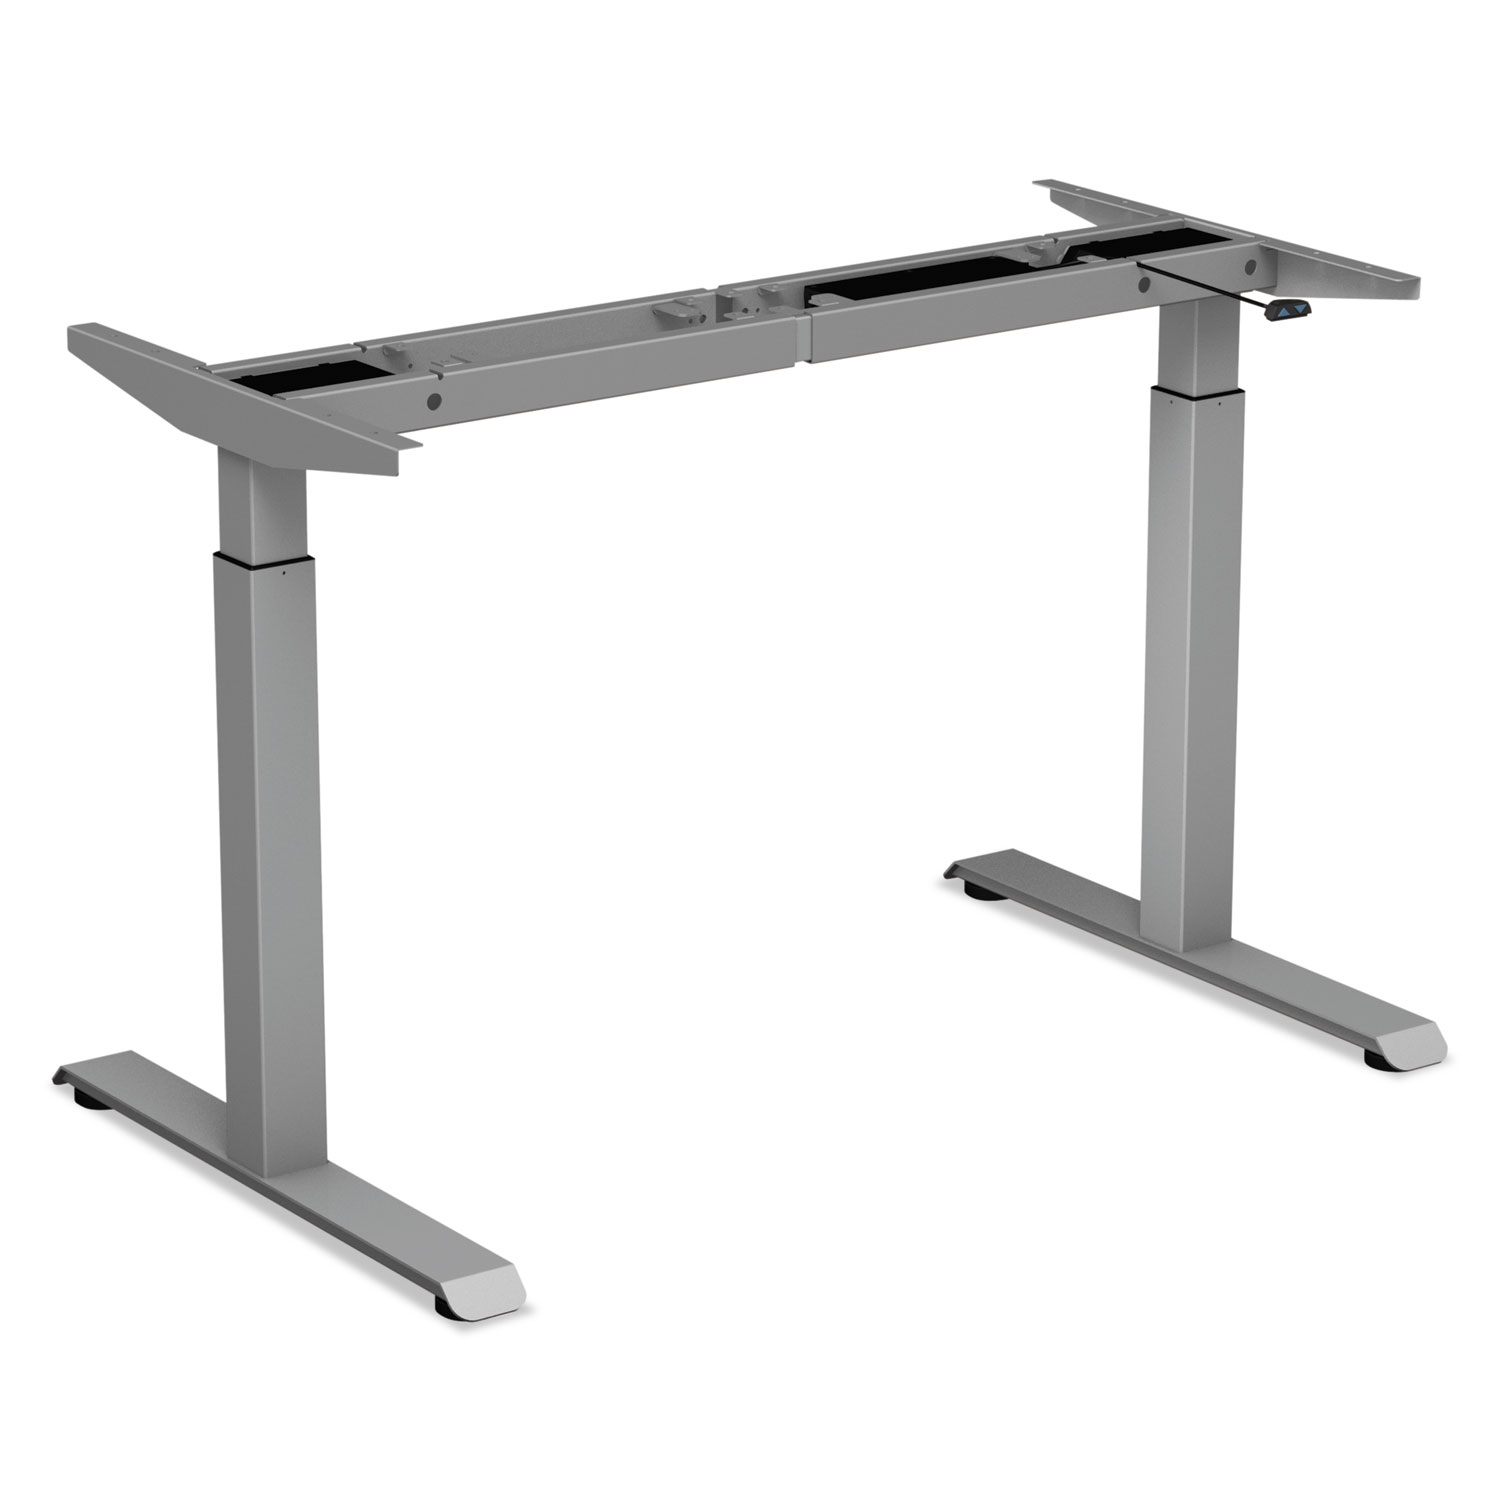 2-Stage Electric Adjustable Table Base, 27 1/2 to 47 1/4 High, Gray